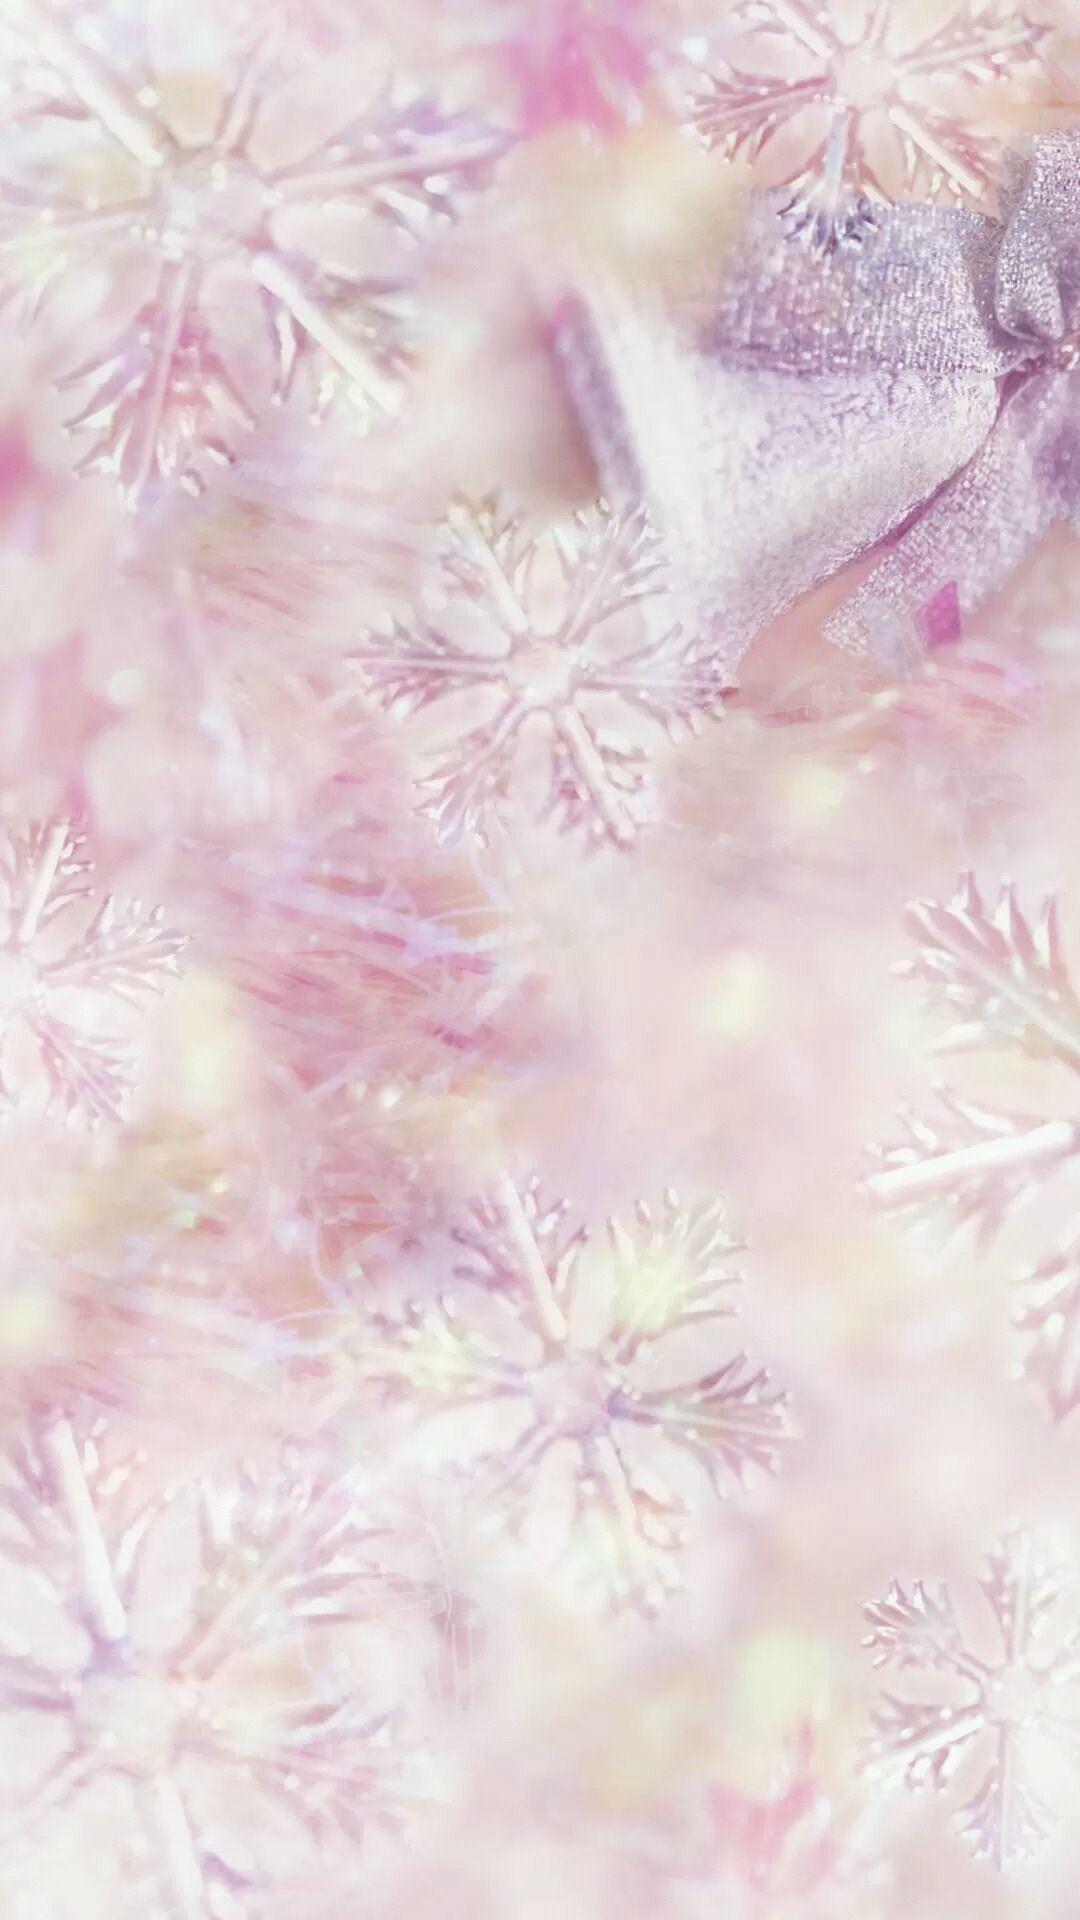 Dreamy snowflakes. Tap to see more winter frozen beautiful